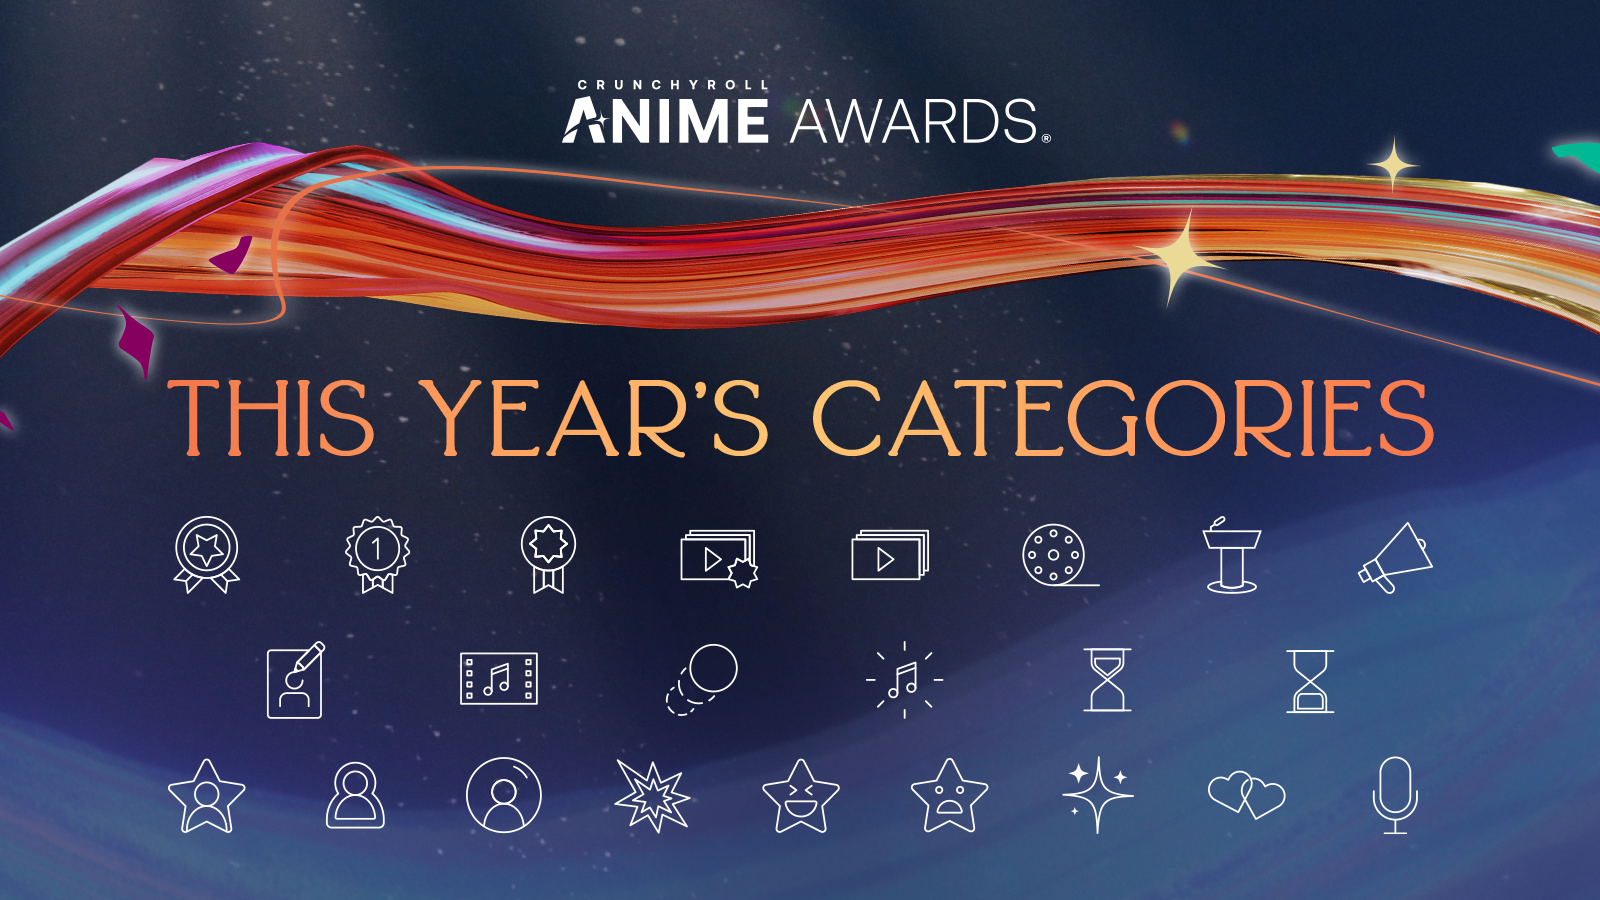 Here's How to Vote for Your Favorites in the Crunchyroll Anime Awards